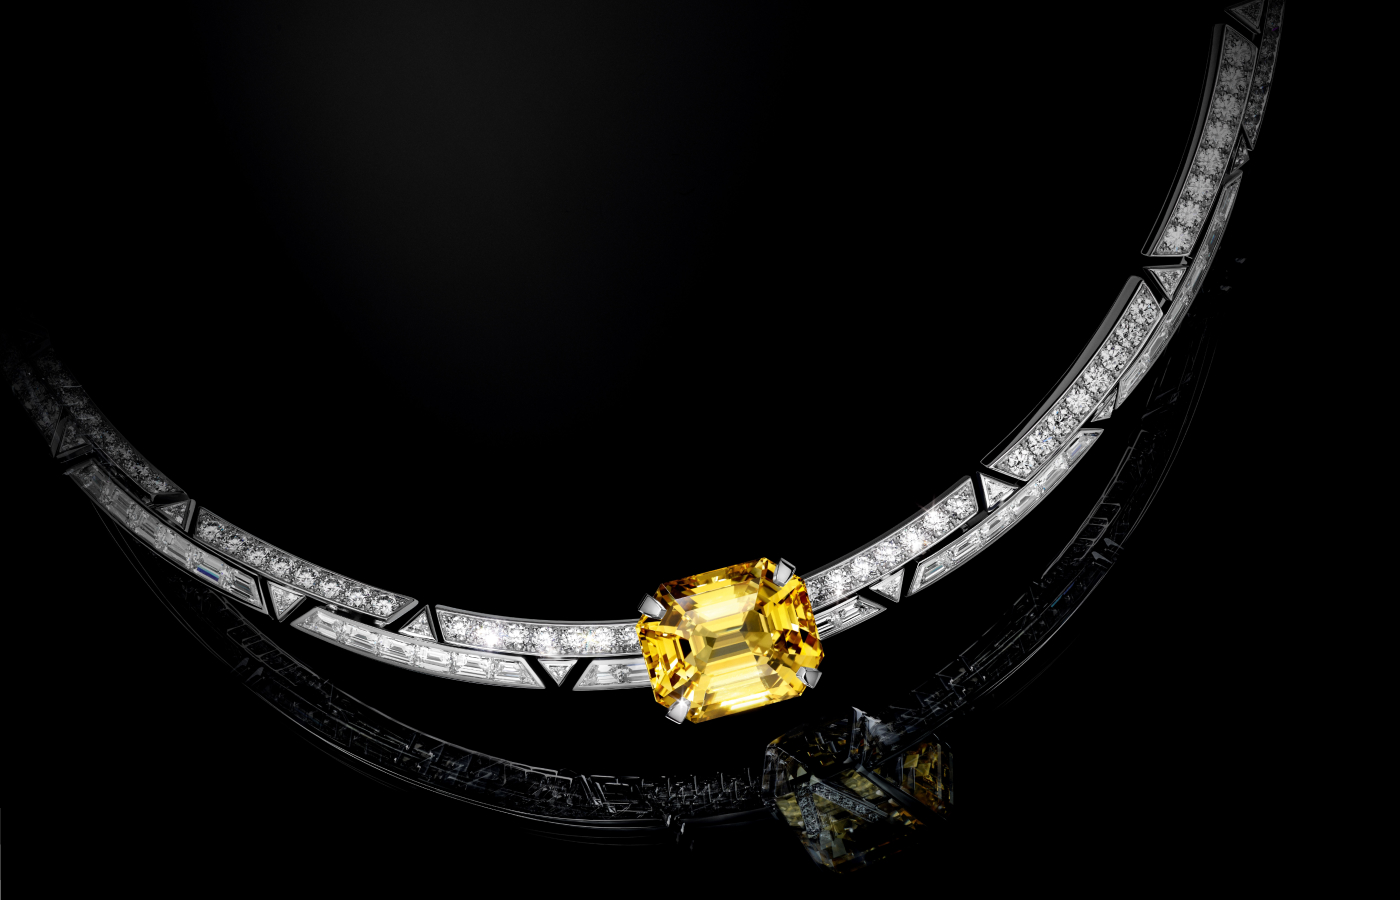 Drift necklace in 18k white gold, set with one octagonal step-cut golden-yellow sapphire of 30.47 carats from Sri Lanka and diamonds, from the Louis Vuitton Deep Time Chapter II High Jewellery collection